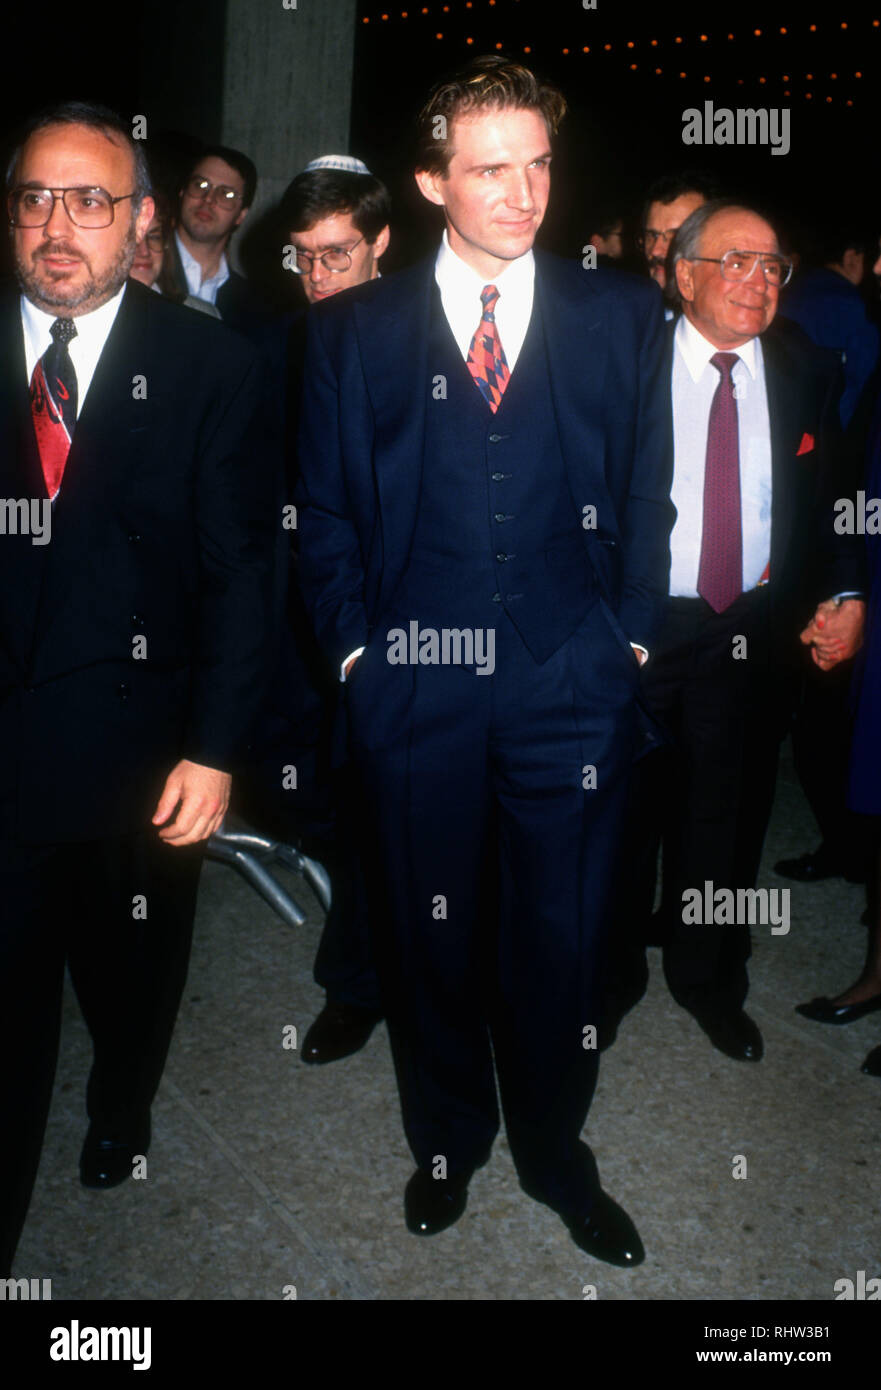 CENTURY CITY, CA - DECEMBER 9: Actor Ralph Fiennes attends Universal Pictures' 'Schindler's List' Premiere on December 9, 1993 at Cineplex Odeon Century Plaza Cinemas in Century City, California. Photo by Barry King/Alamy Stock Photo Stock Photo